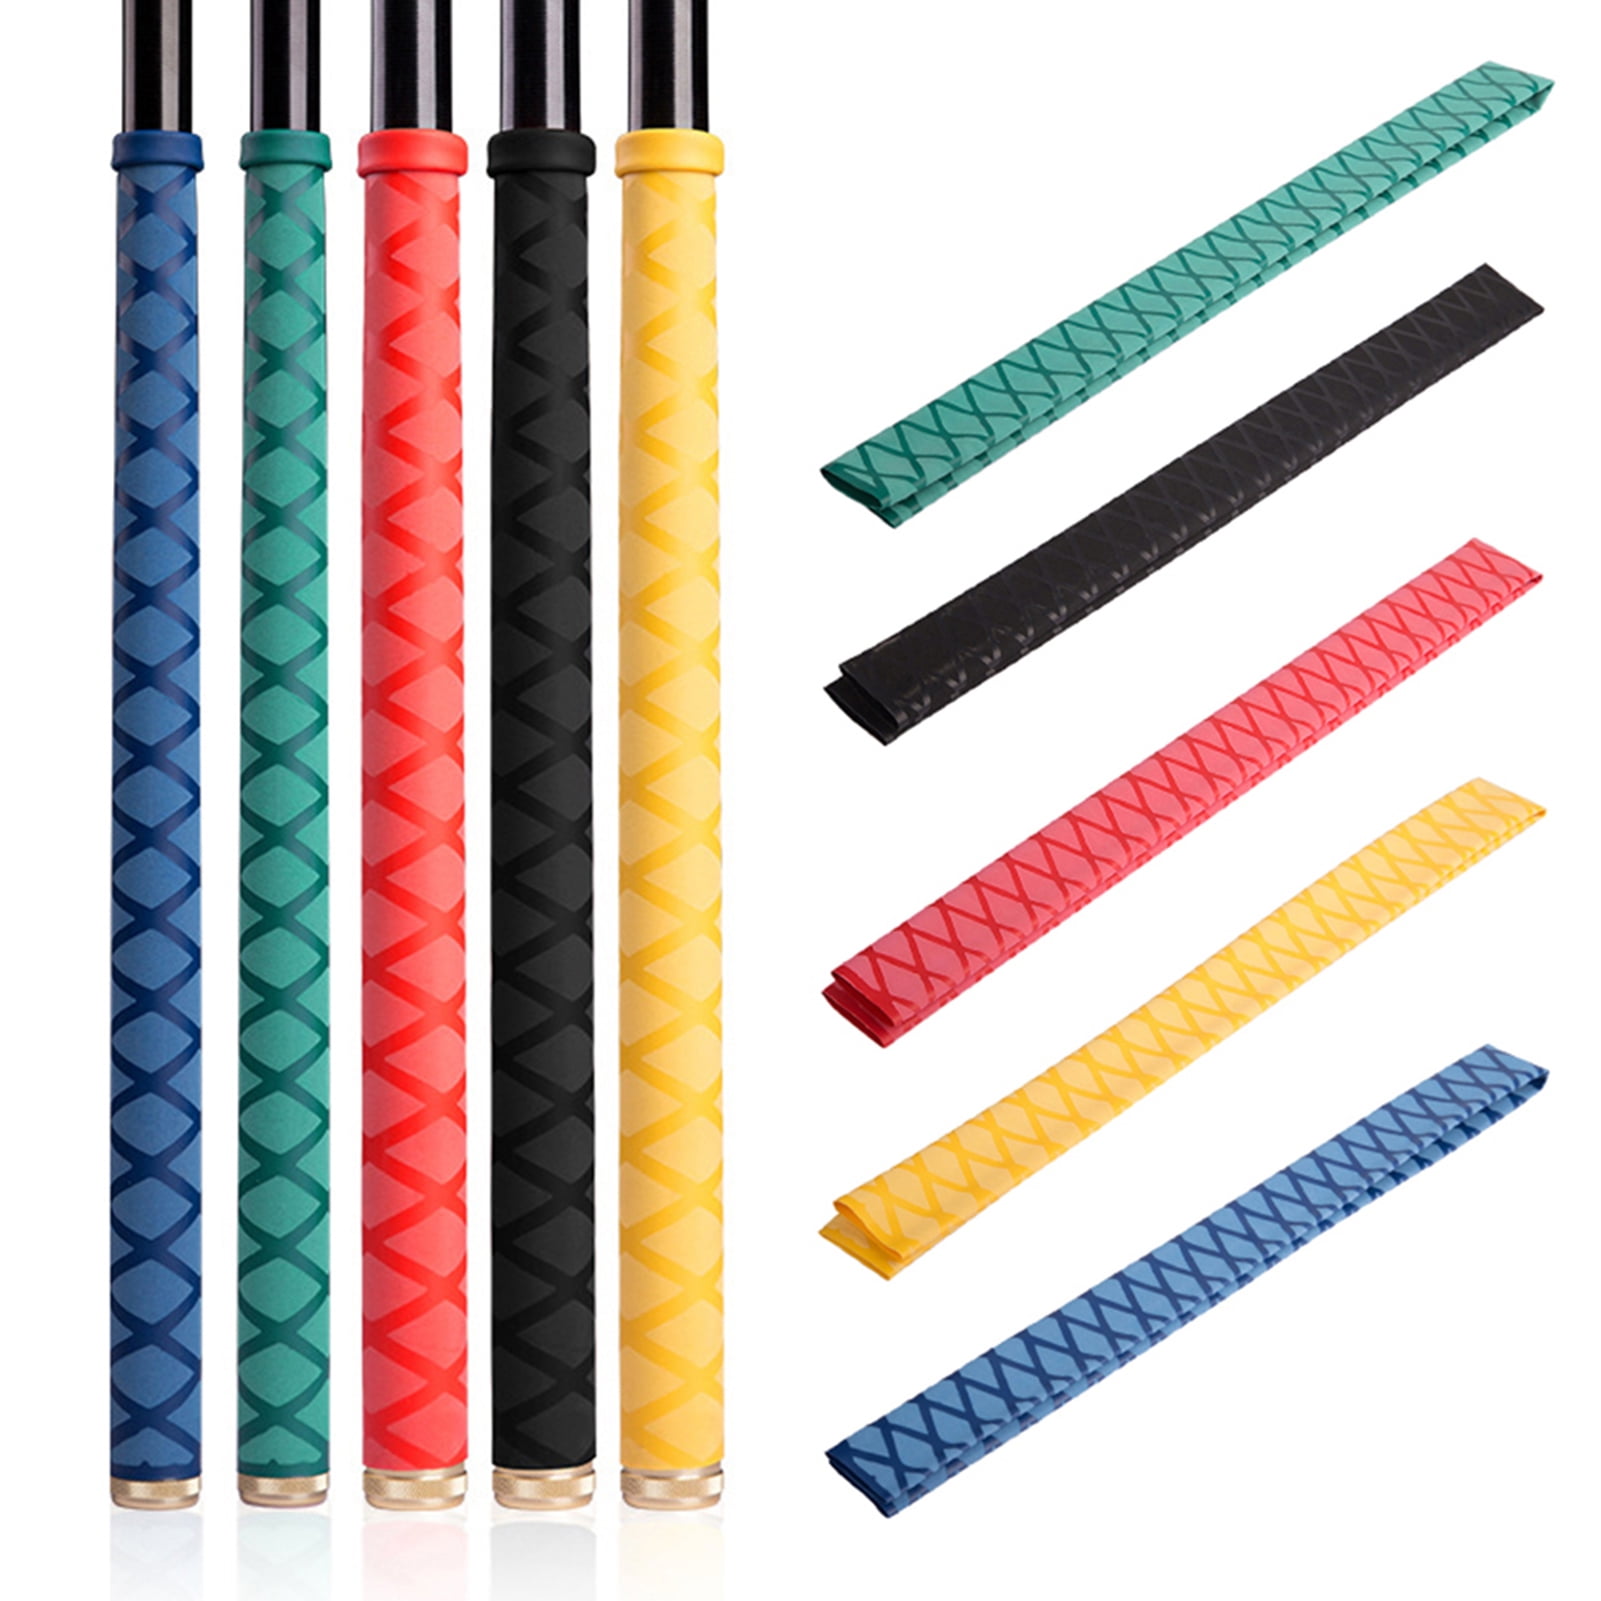 Details about   1X 1m Anti-slip Fishing Rod Grip Heat Shrink Sleeve Wrap Tube Protective Cover 